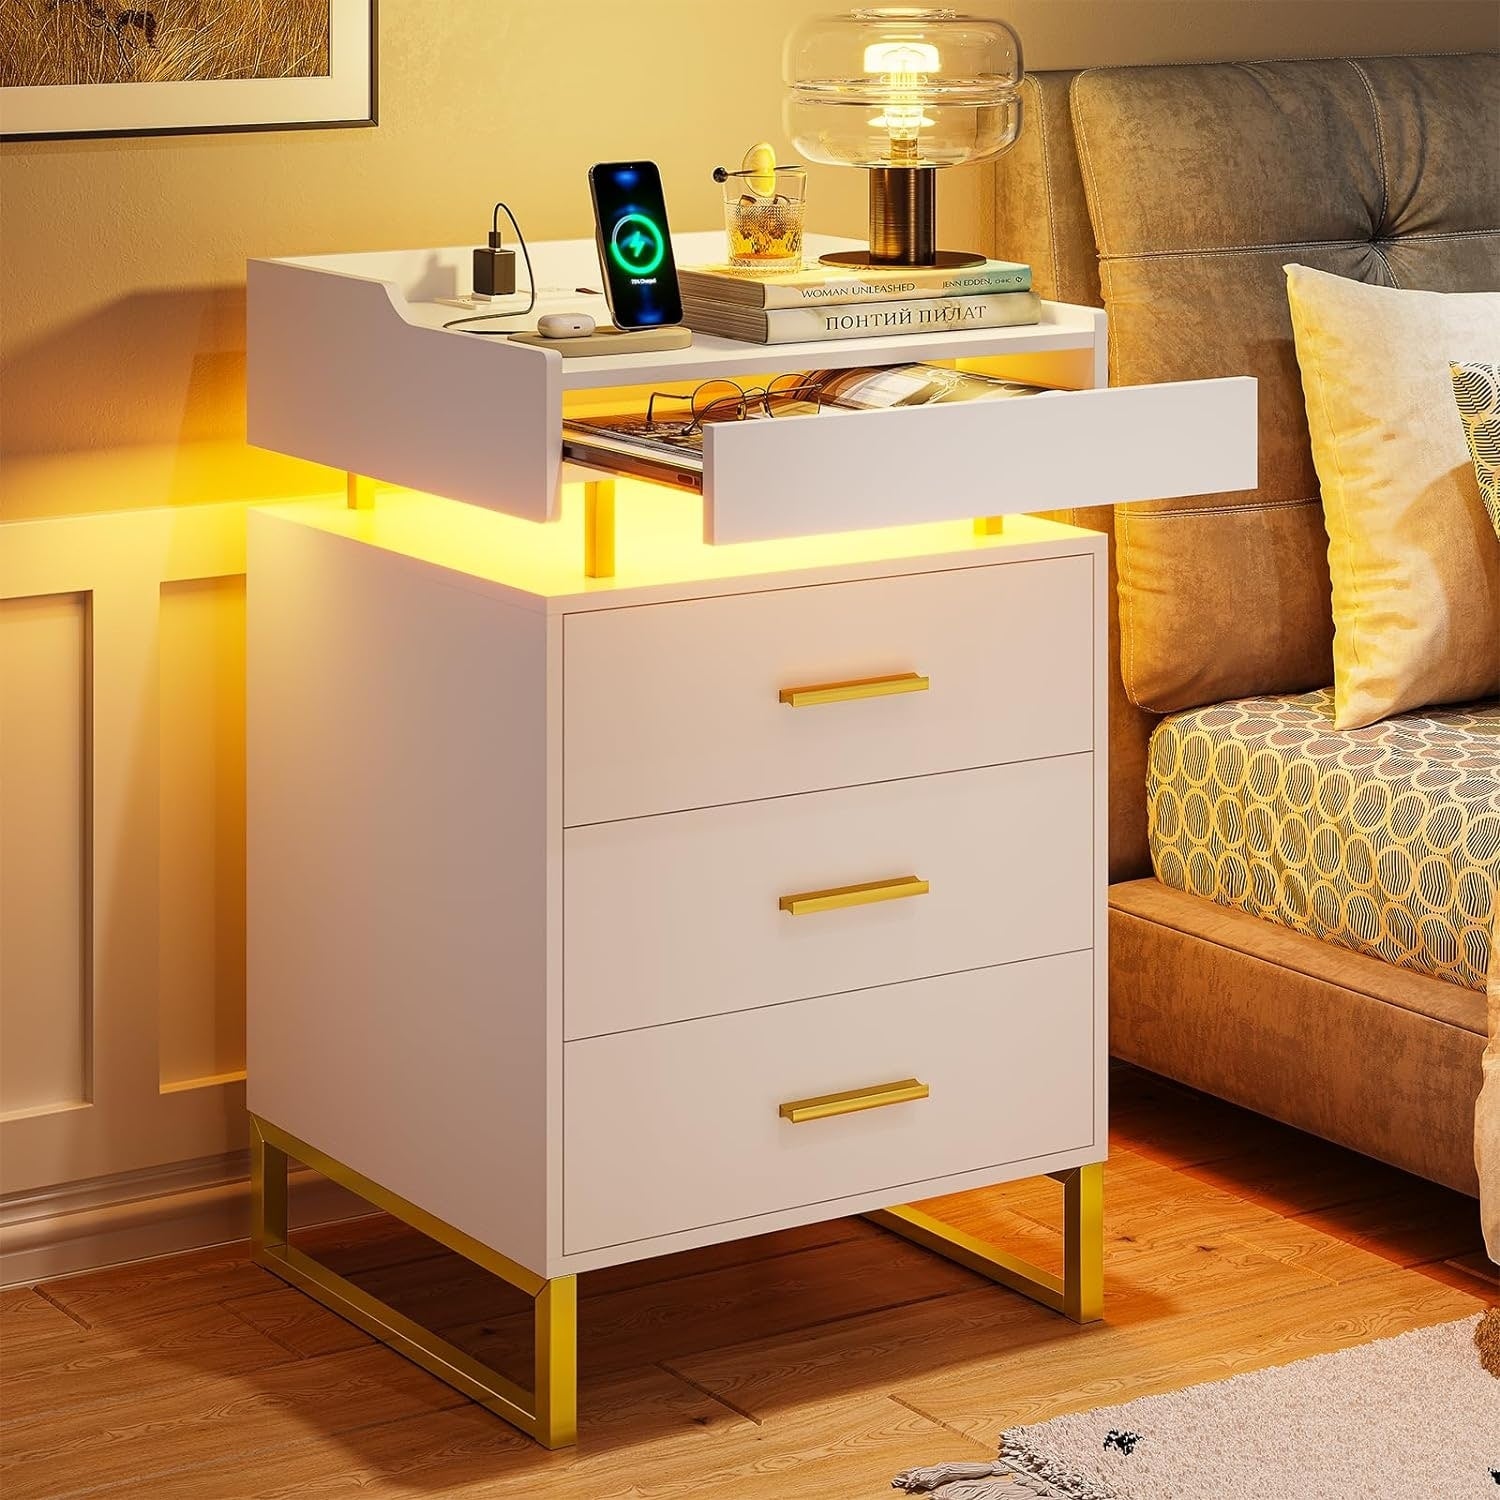 3 Drawers LED Nightstand Charging Station End Table